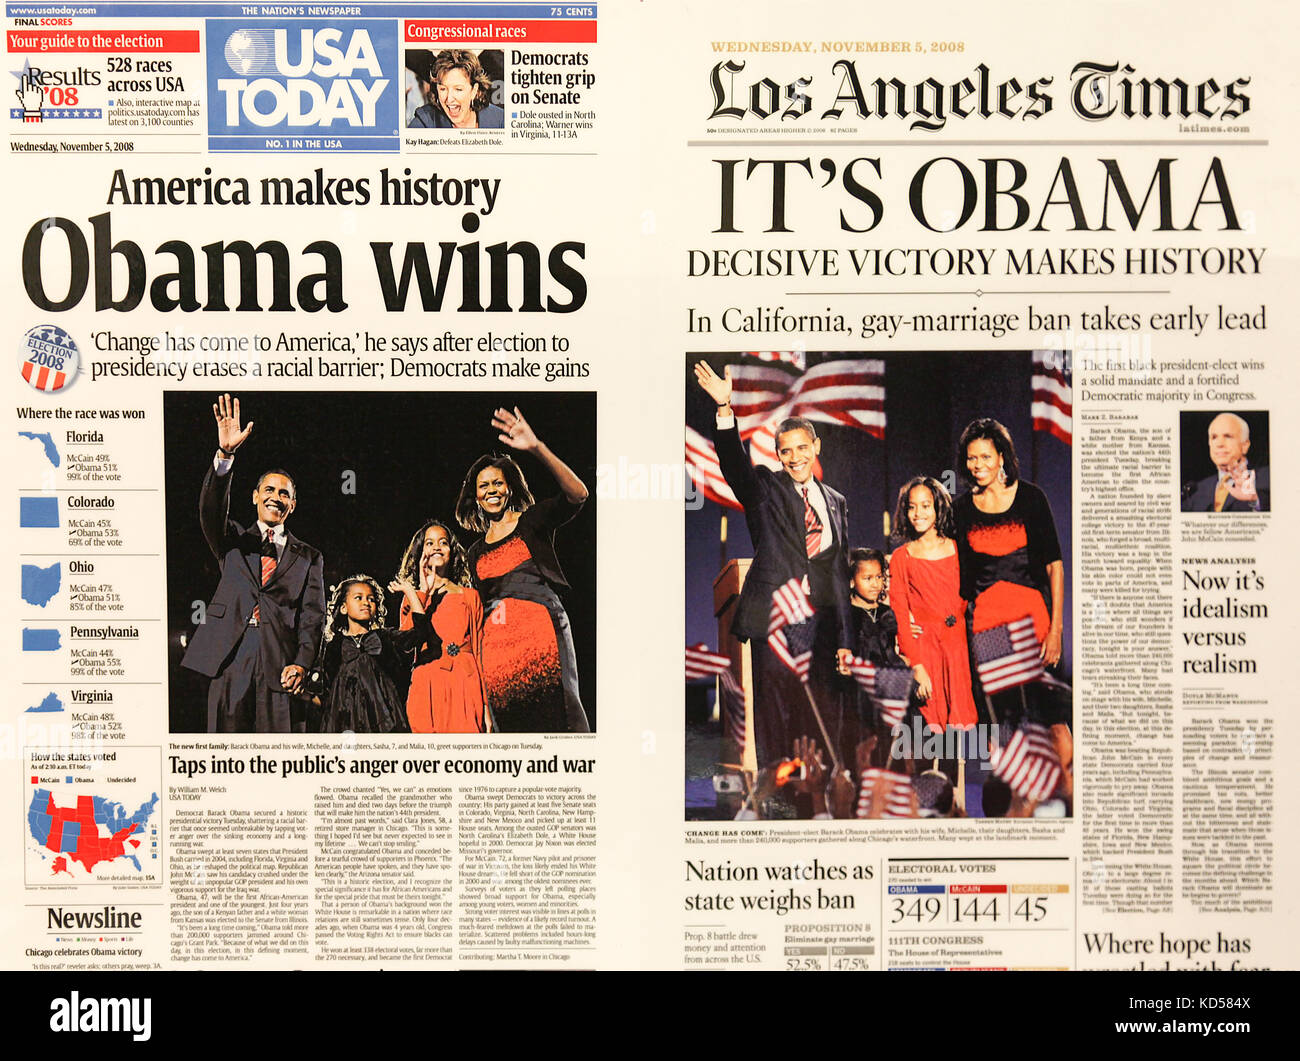 Newspaper front page headlines on Obama's first victory. USA TODAY and the LA Times on Nov. 5, 2008. Sold as souvenirs at inauguration in Wash DC. Stock Photo